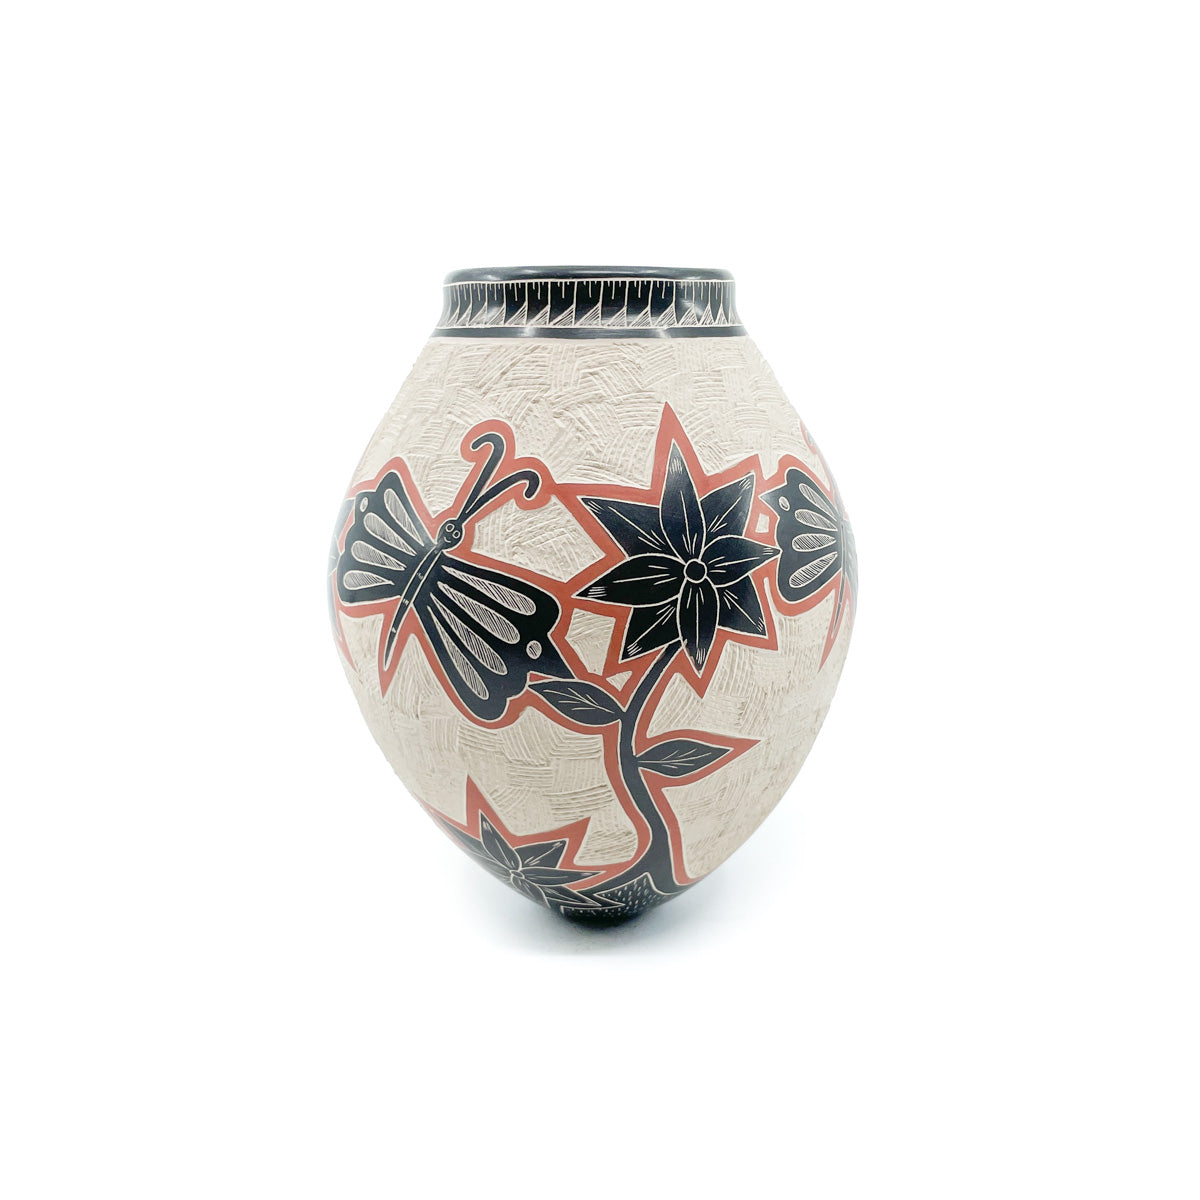 Incised Dragonflies and Flowers on White Clay Pot